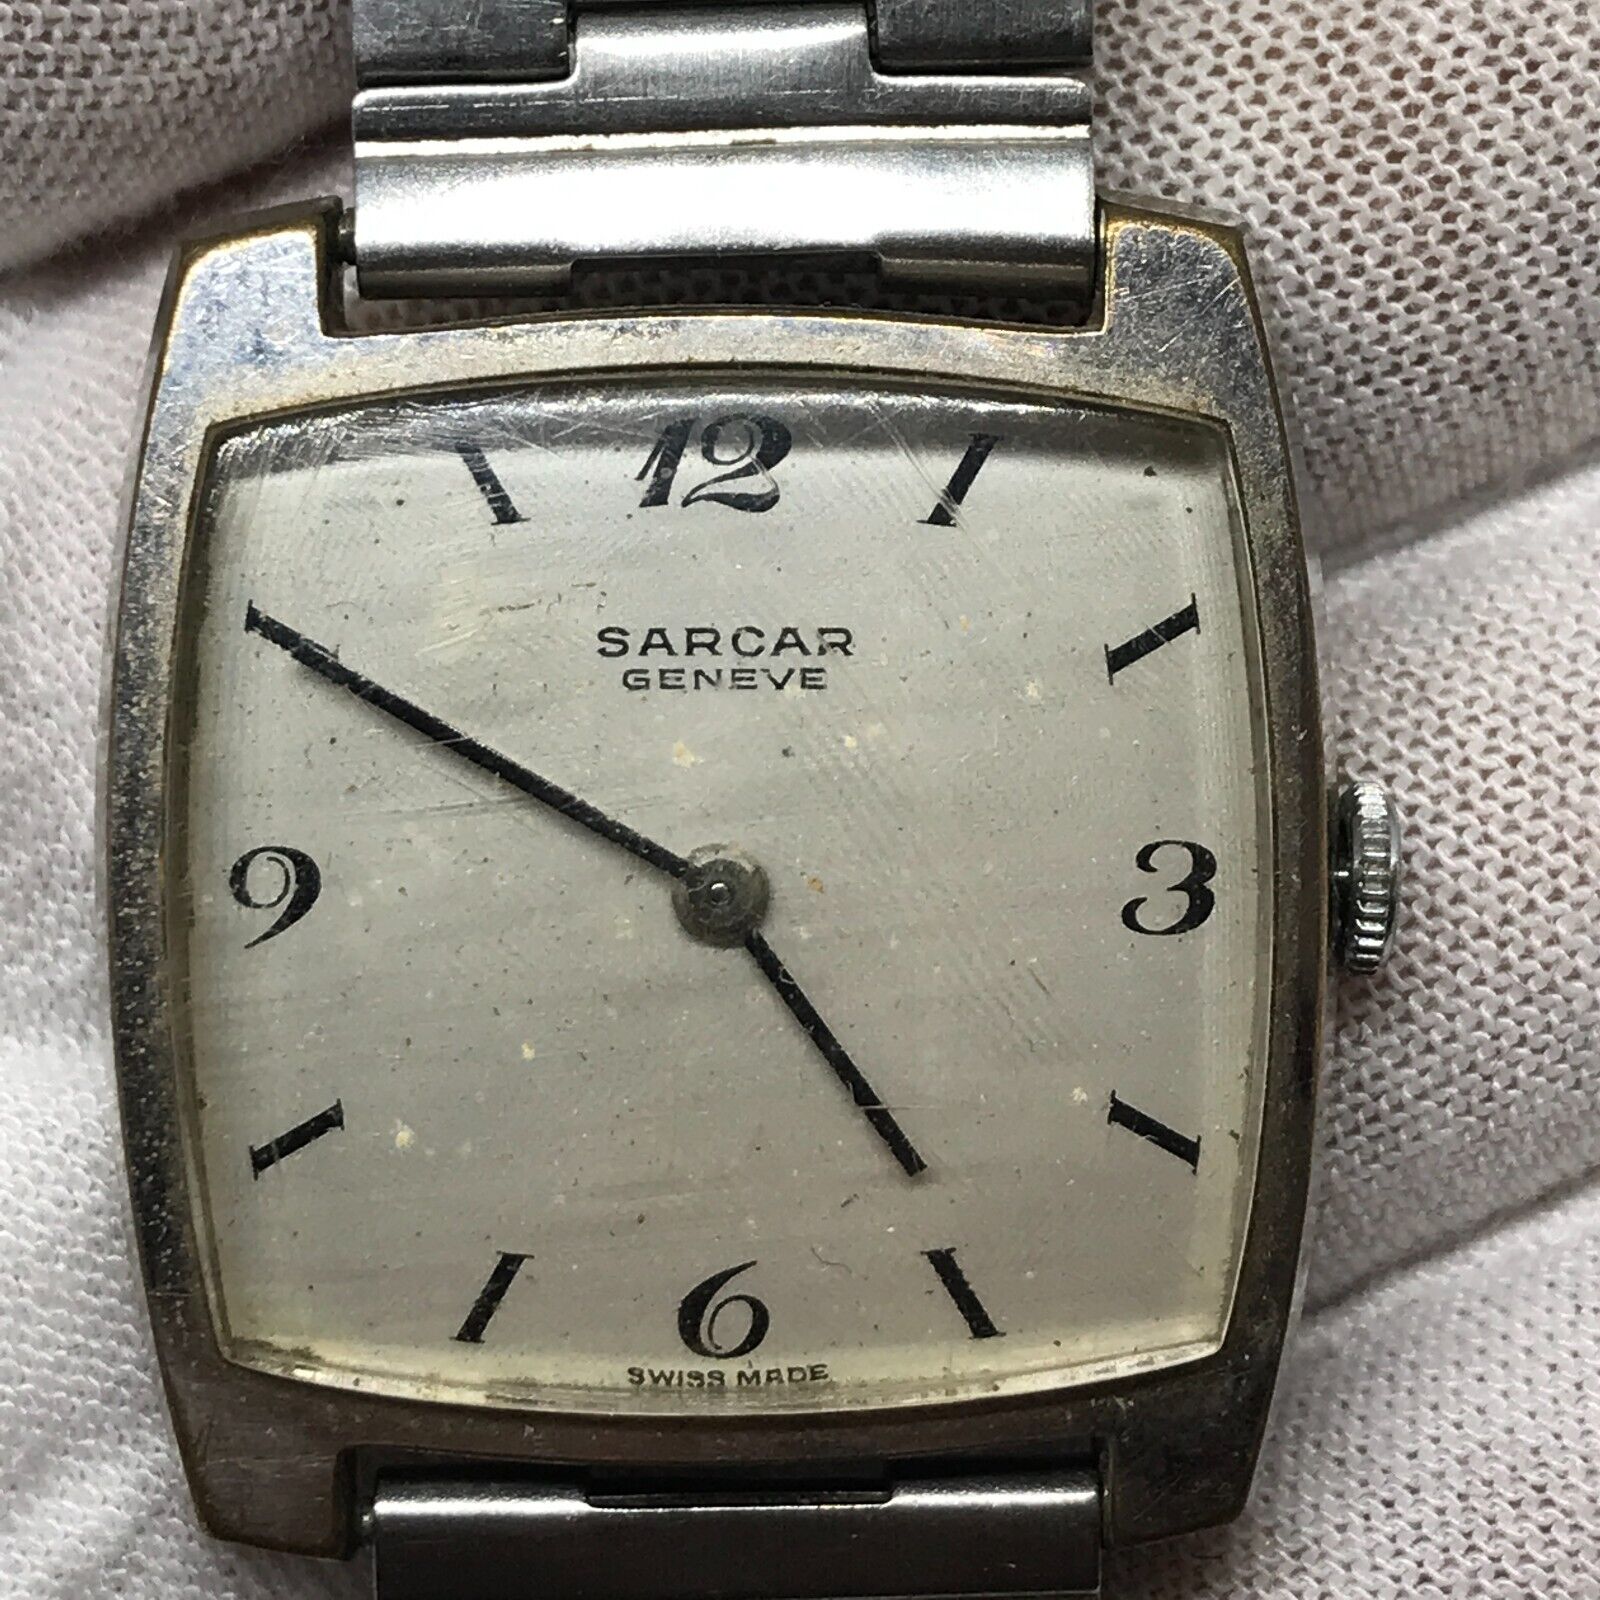 Details more than 140 sarcar watch latest